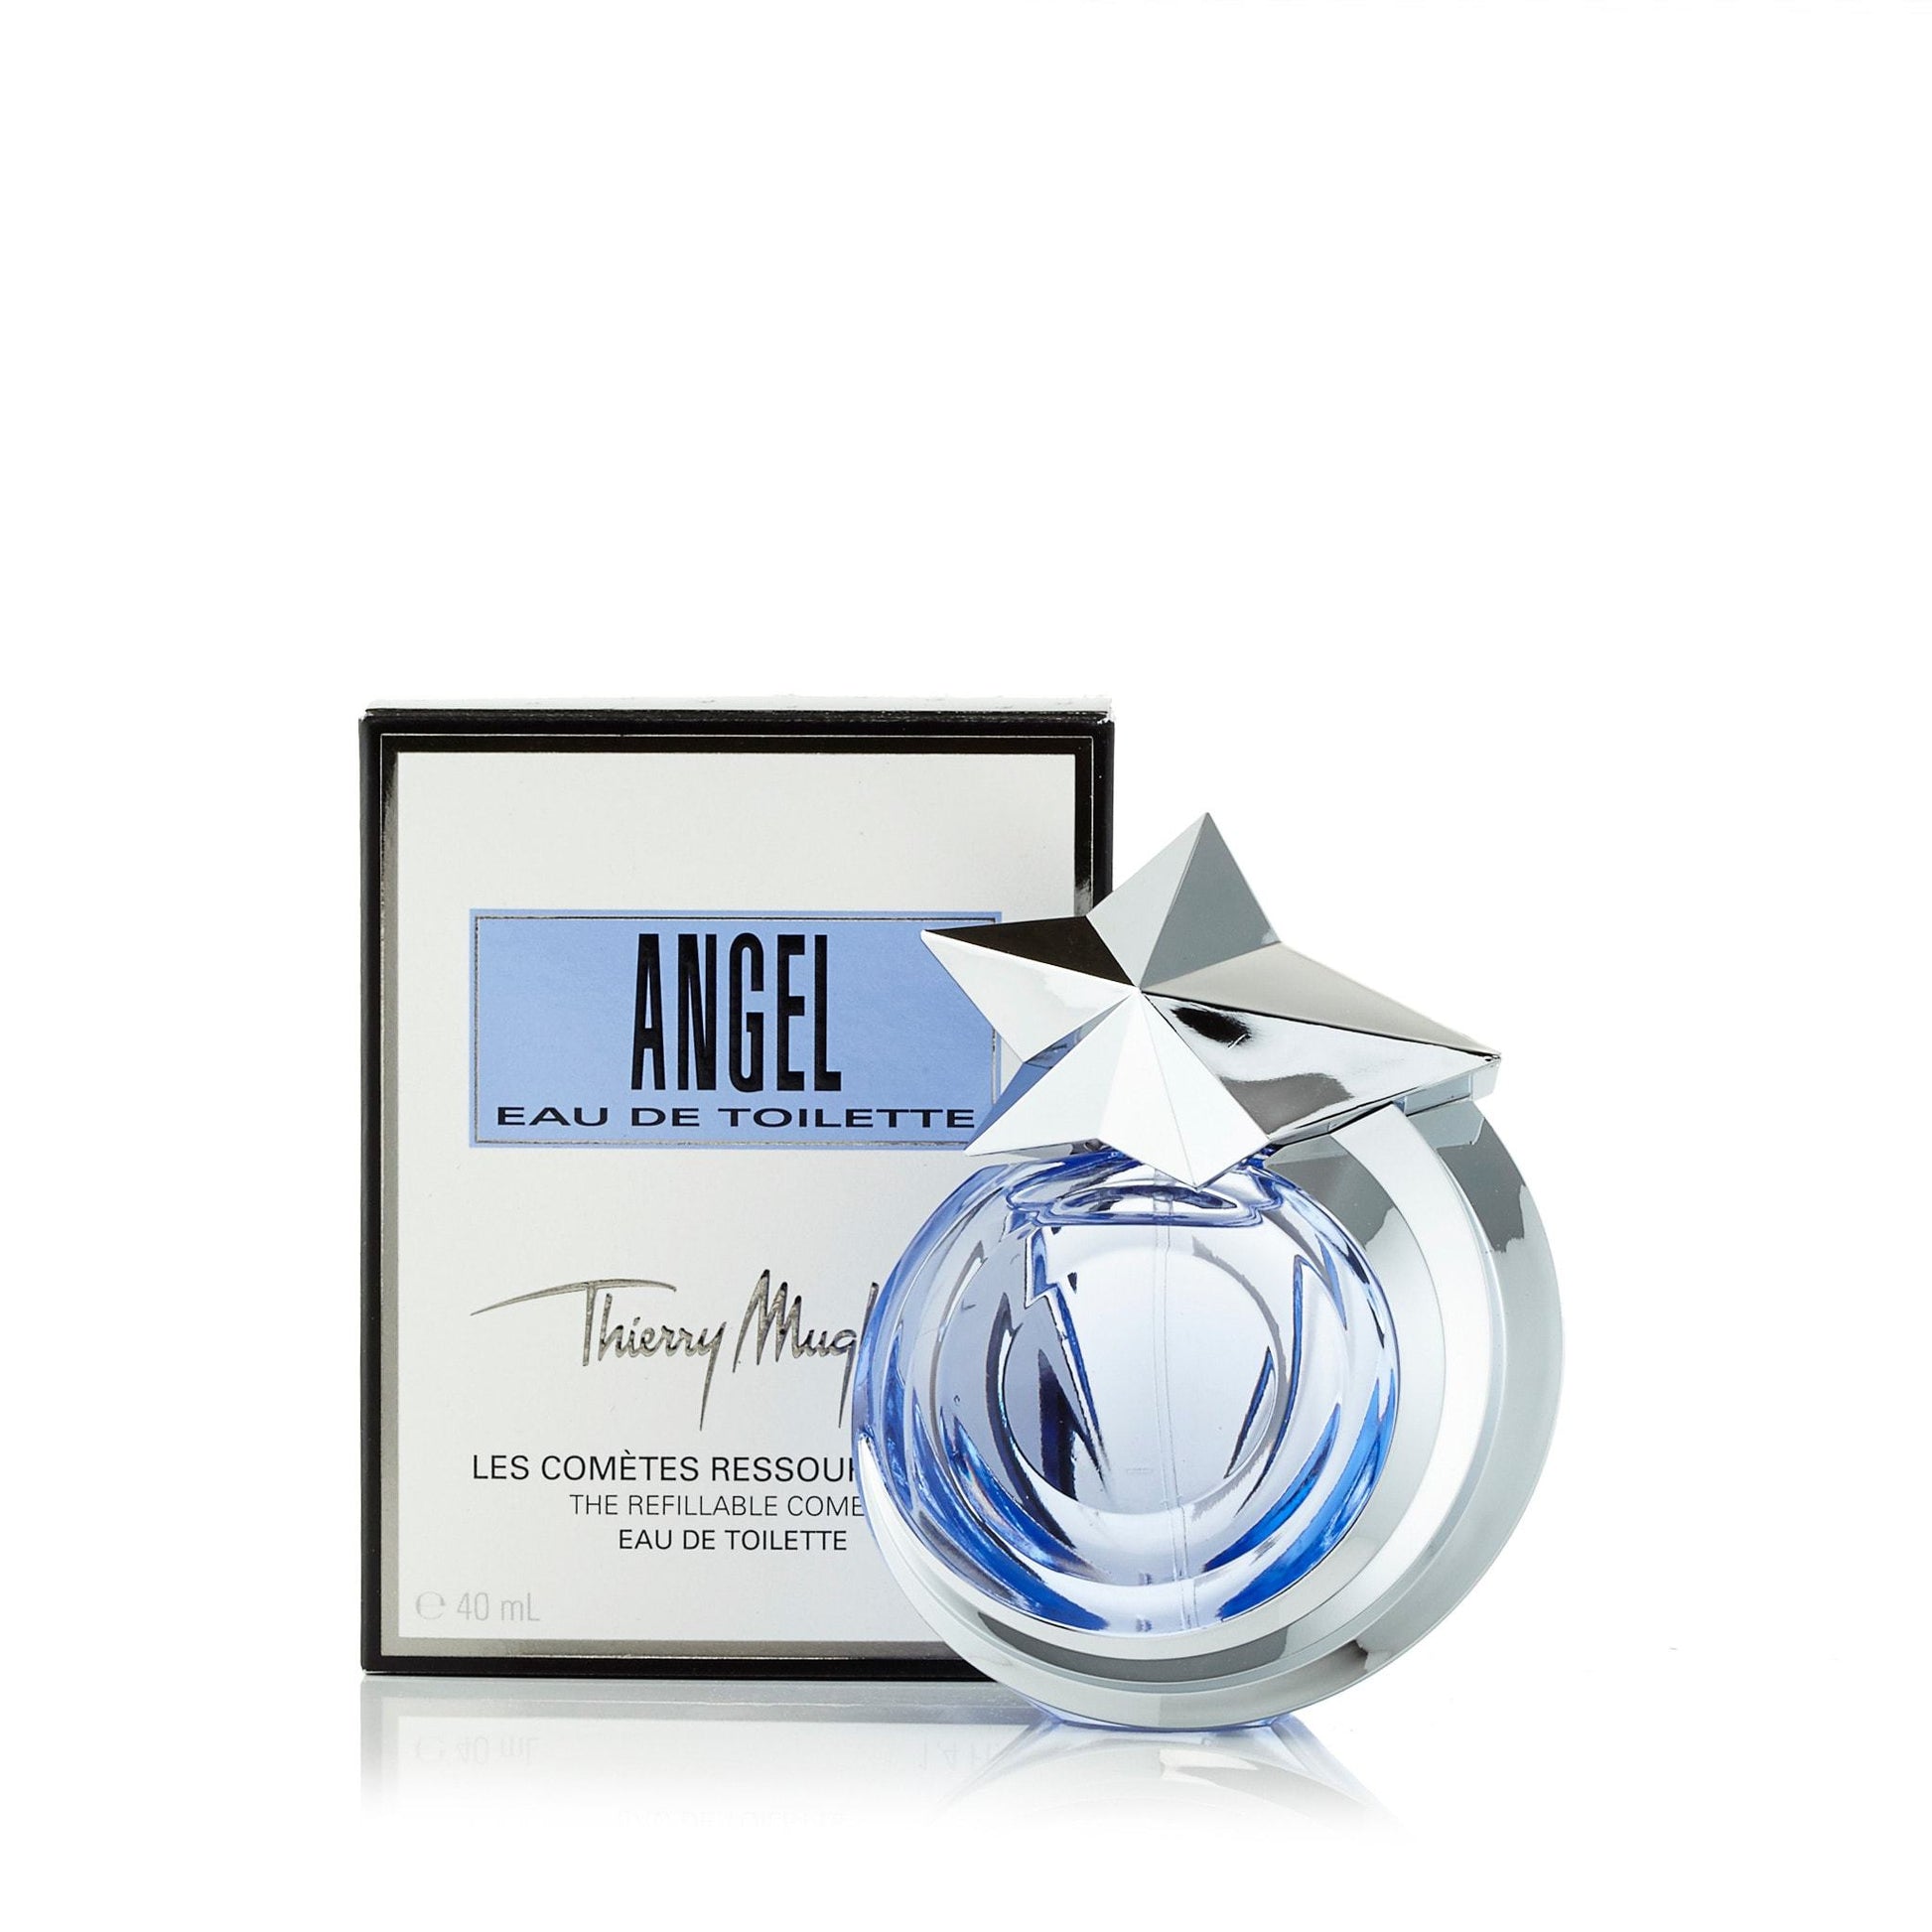 Angel Refillable Eau de Toilette Spray for Women by Thierry Mugler, Product image 3